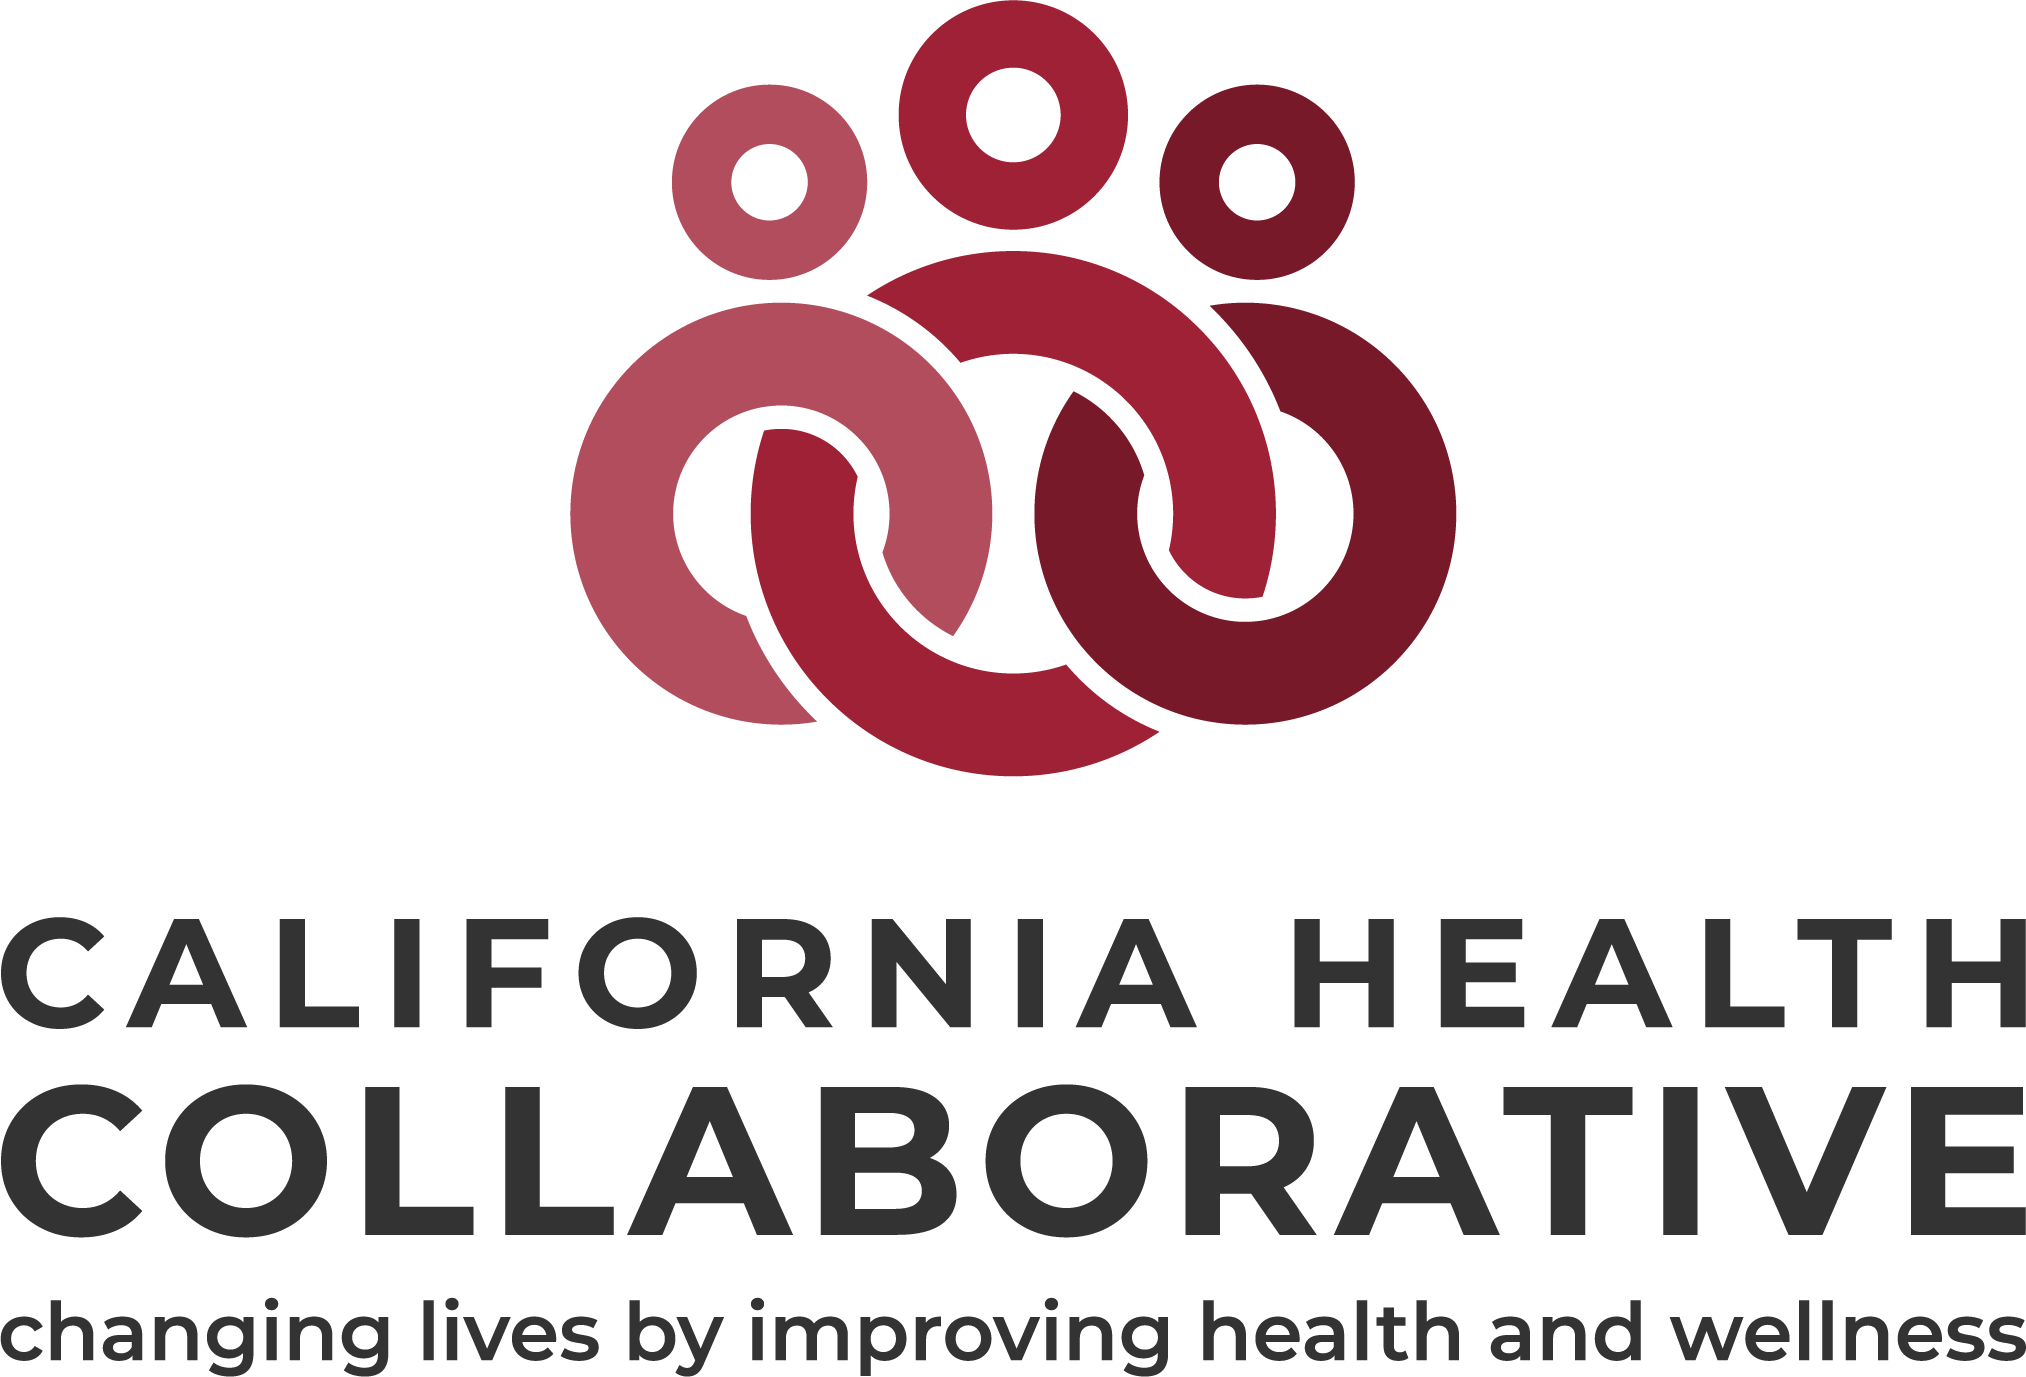 Three interlocking rings formed in the appearance of people and text reading "California Health Collaborative"